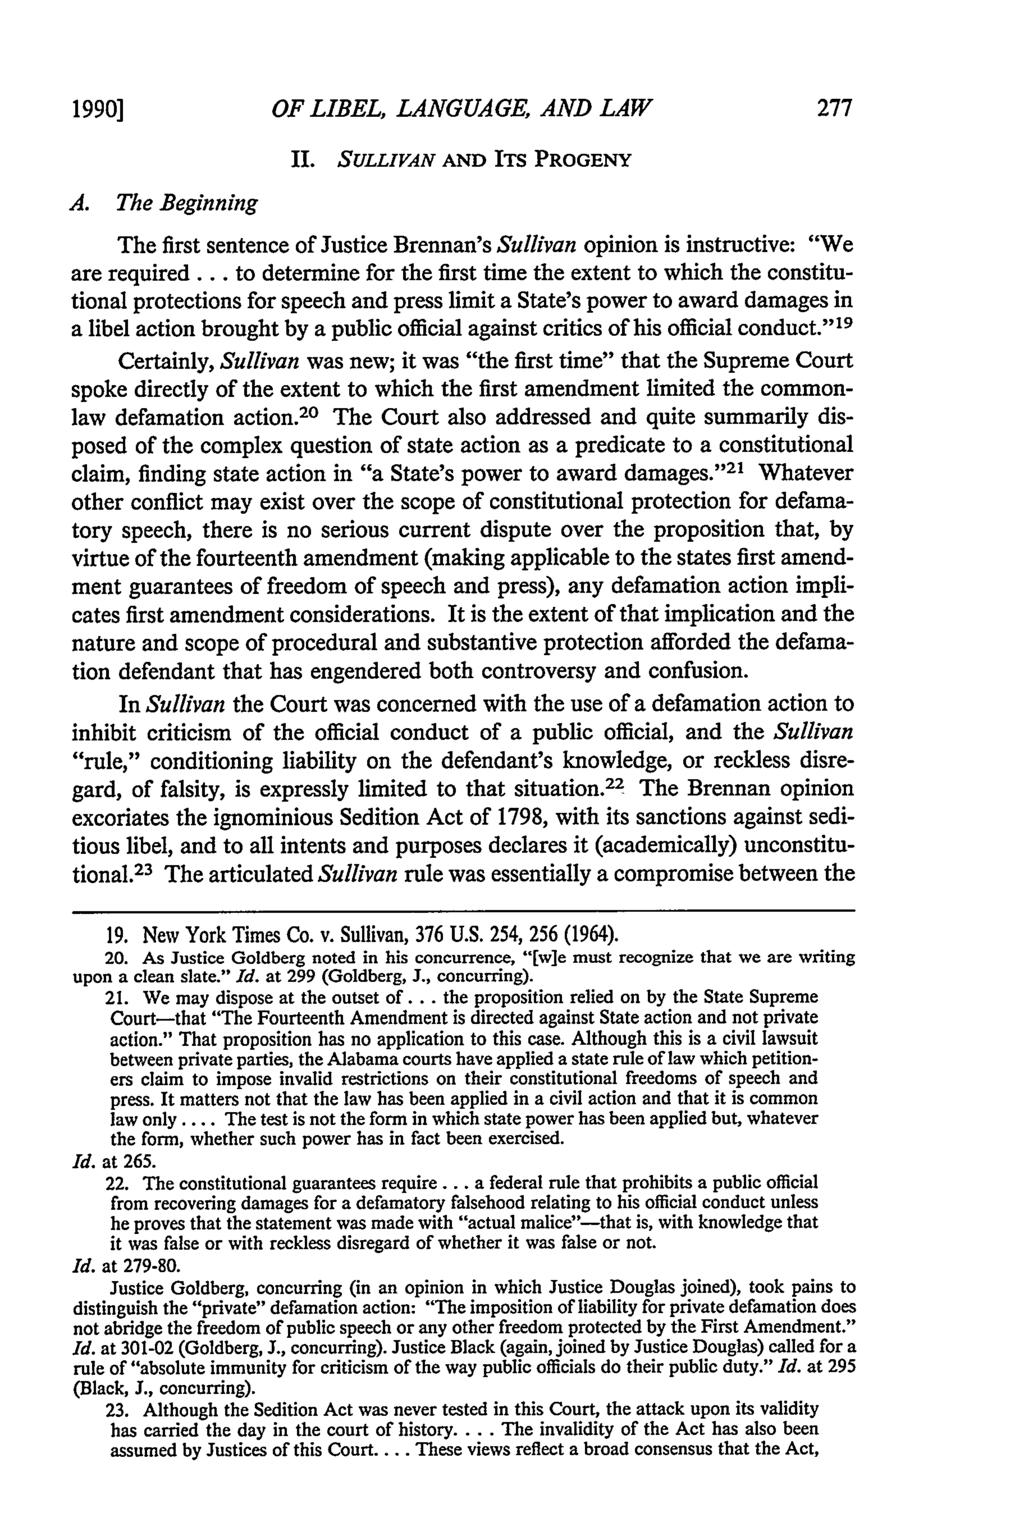 1990] OF LIBEL, LANGUAGE, AND LAW A. The Beginning II. SULLIVAN AND ITS PROGENY The first sentence of Justice Brennan's Sullivan opinion is instructive: "We are required.